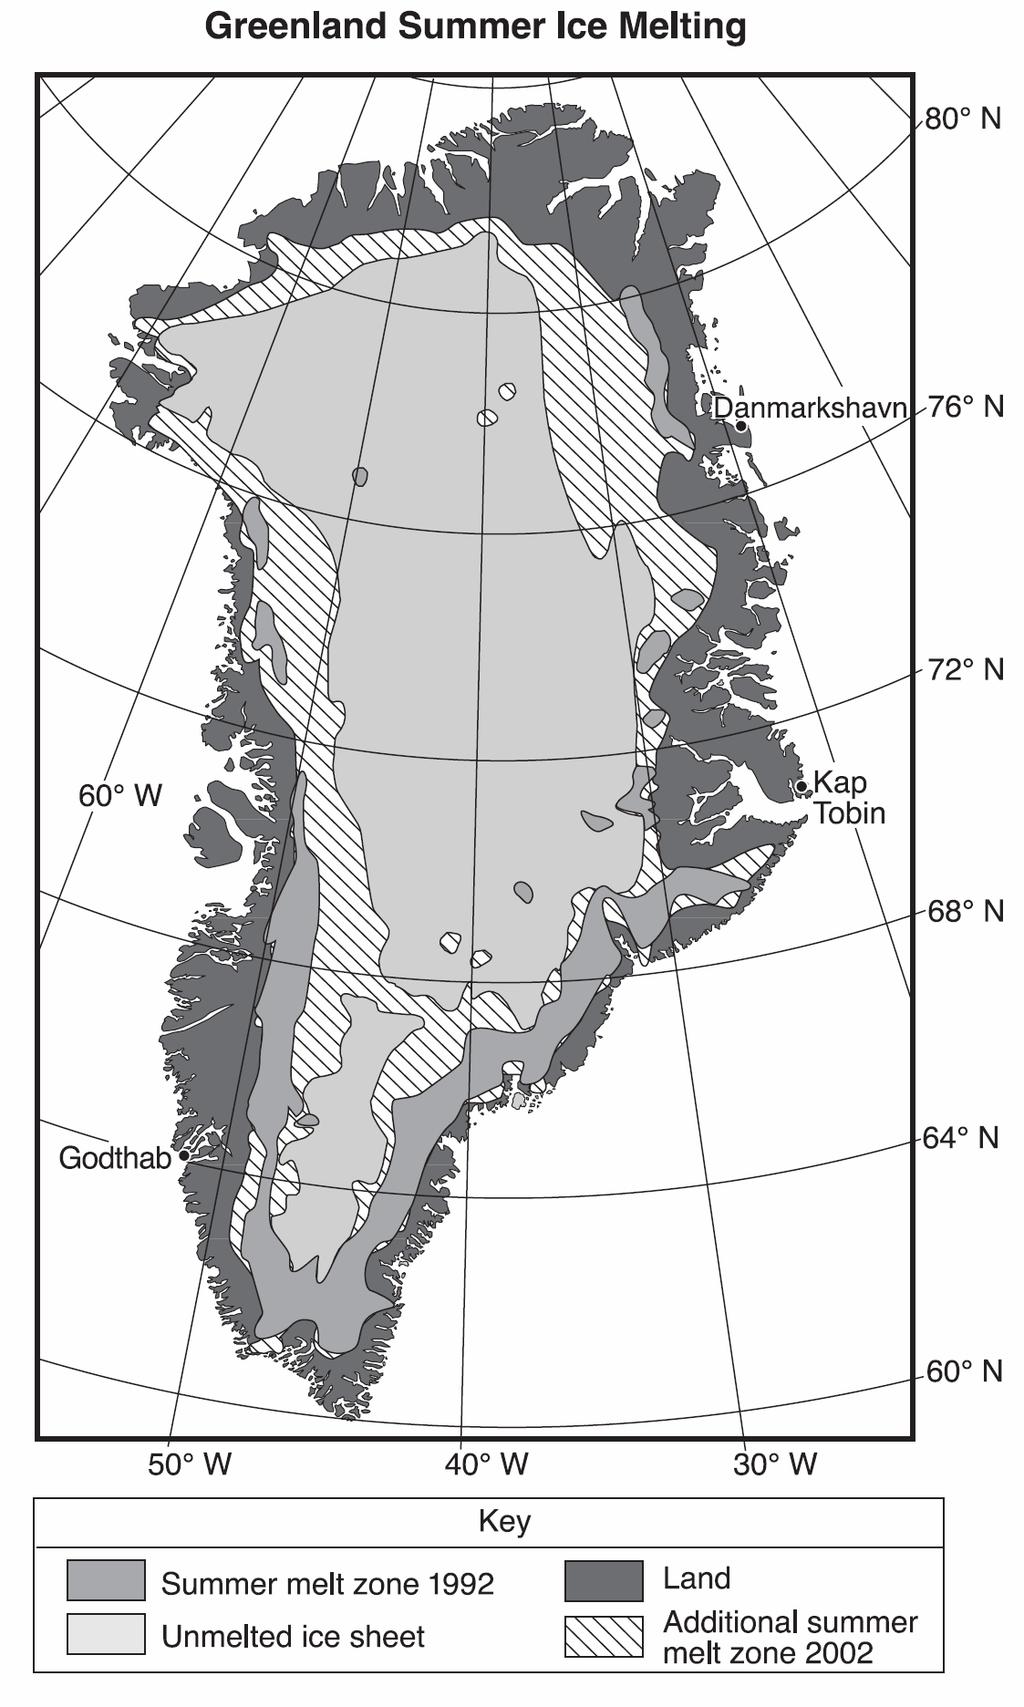 24. Base your answer to the following question on the following map and passage. The map shows the extent of summer ice-melt zones on Greenland in 1992 and 2002.